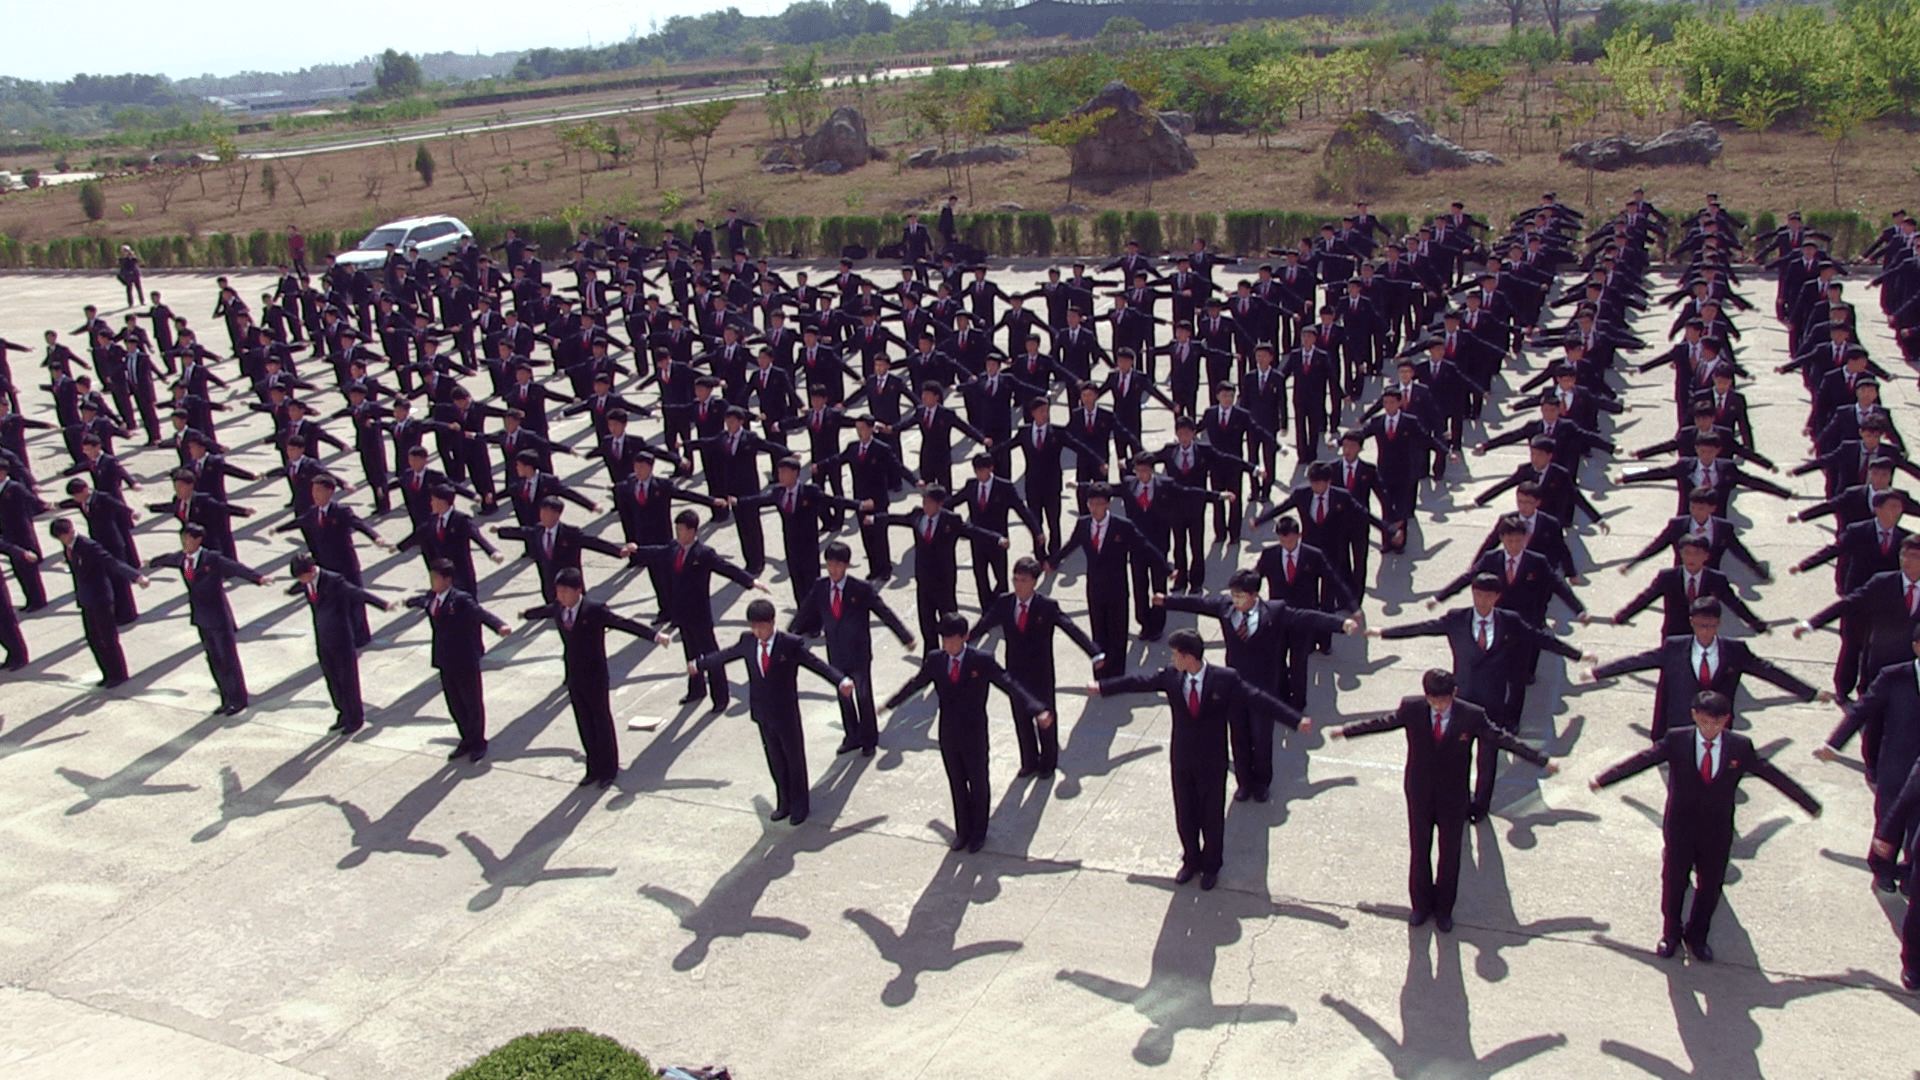 Students exercising at Pyongyang University of Science and Technology